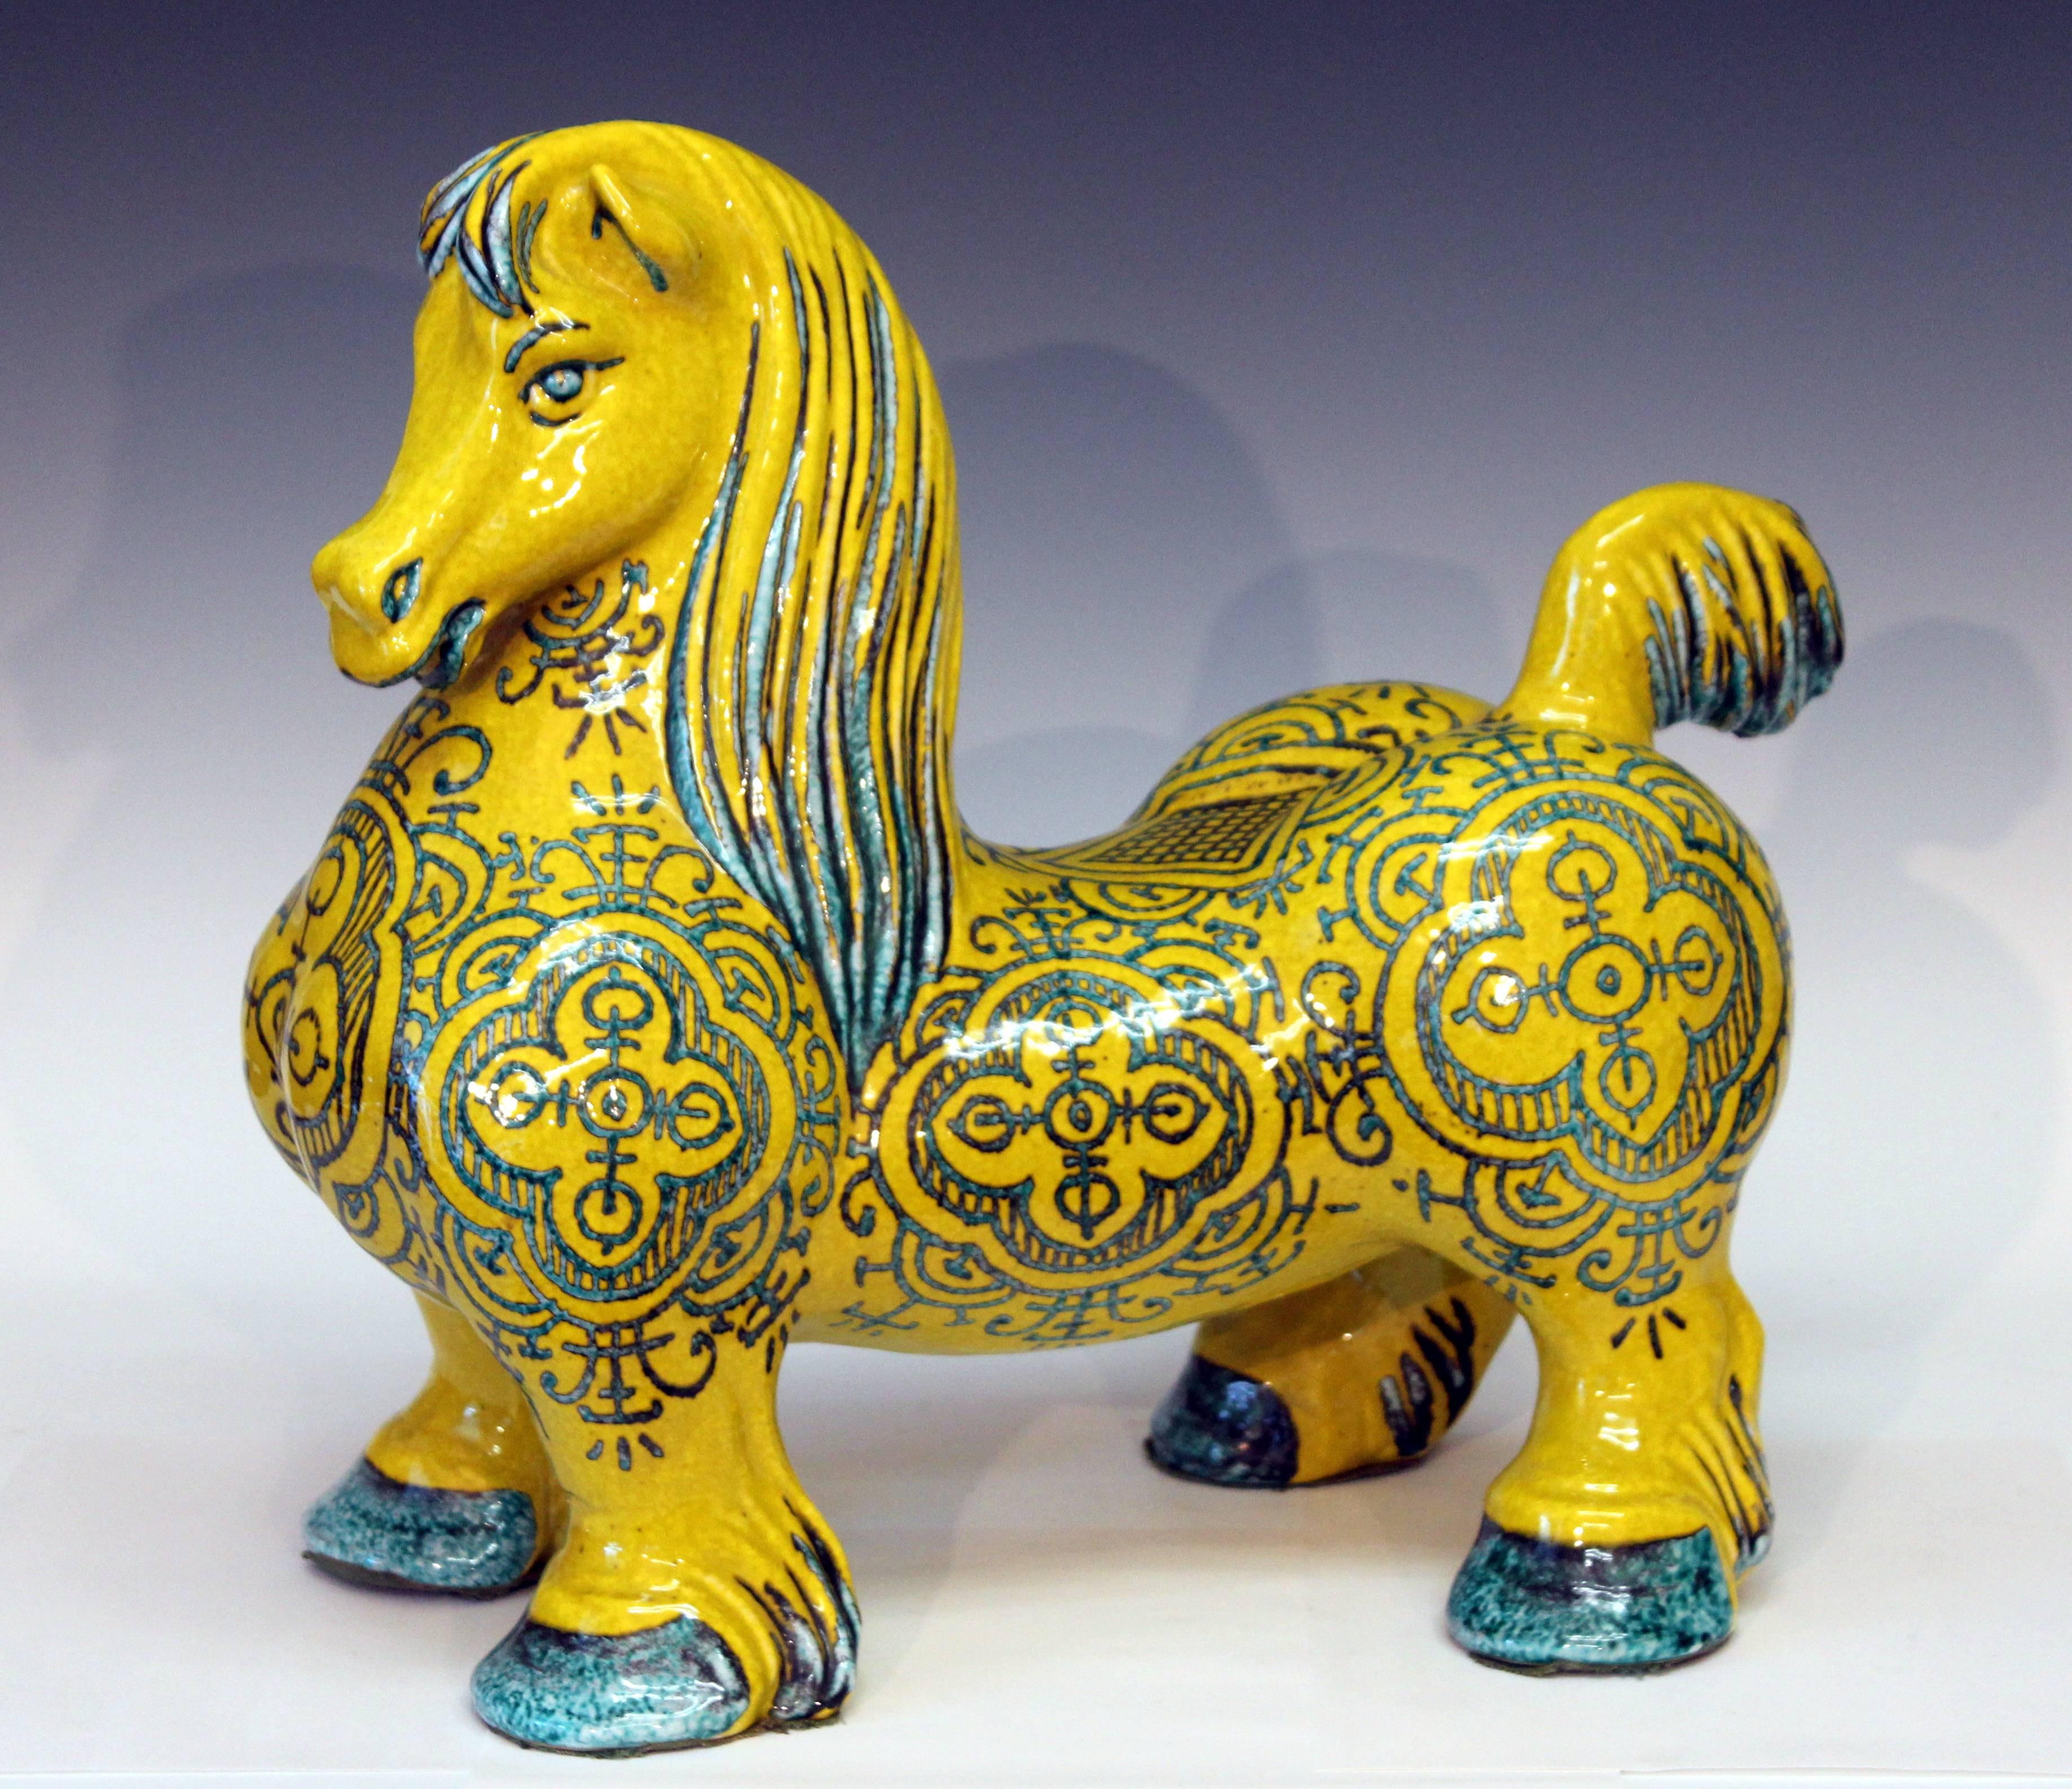 Large and heavy Italian pottery horse by the Mancioli Pottery, circa 1960s. The muscular figure standing proud with elaborate design painted in a curious fugitive green glaze over bright yellow. This is the largest of three sizes that were produced